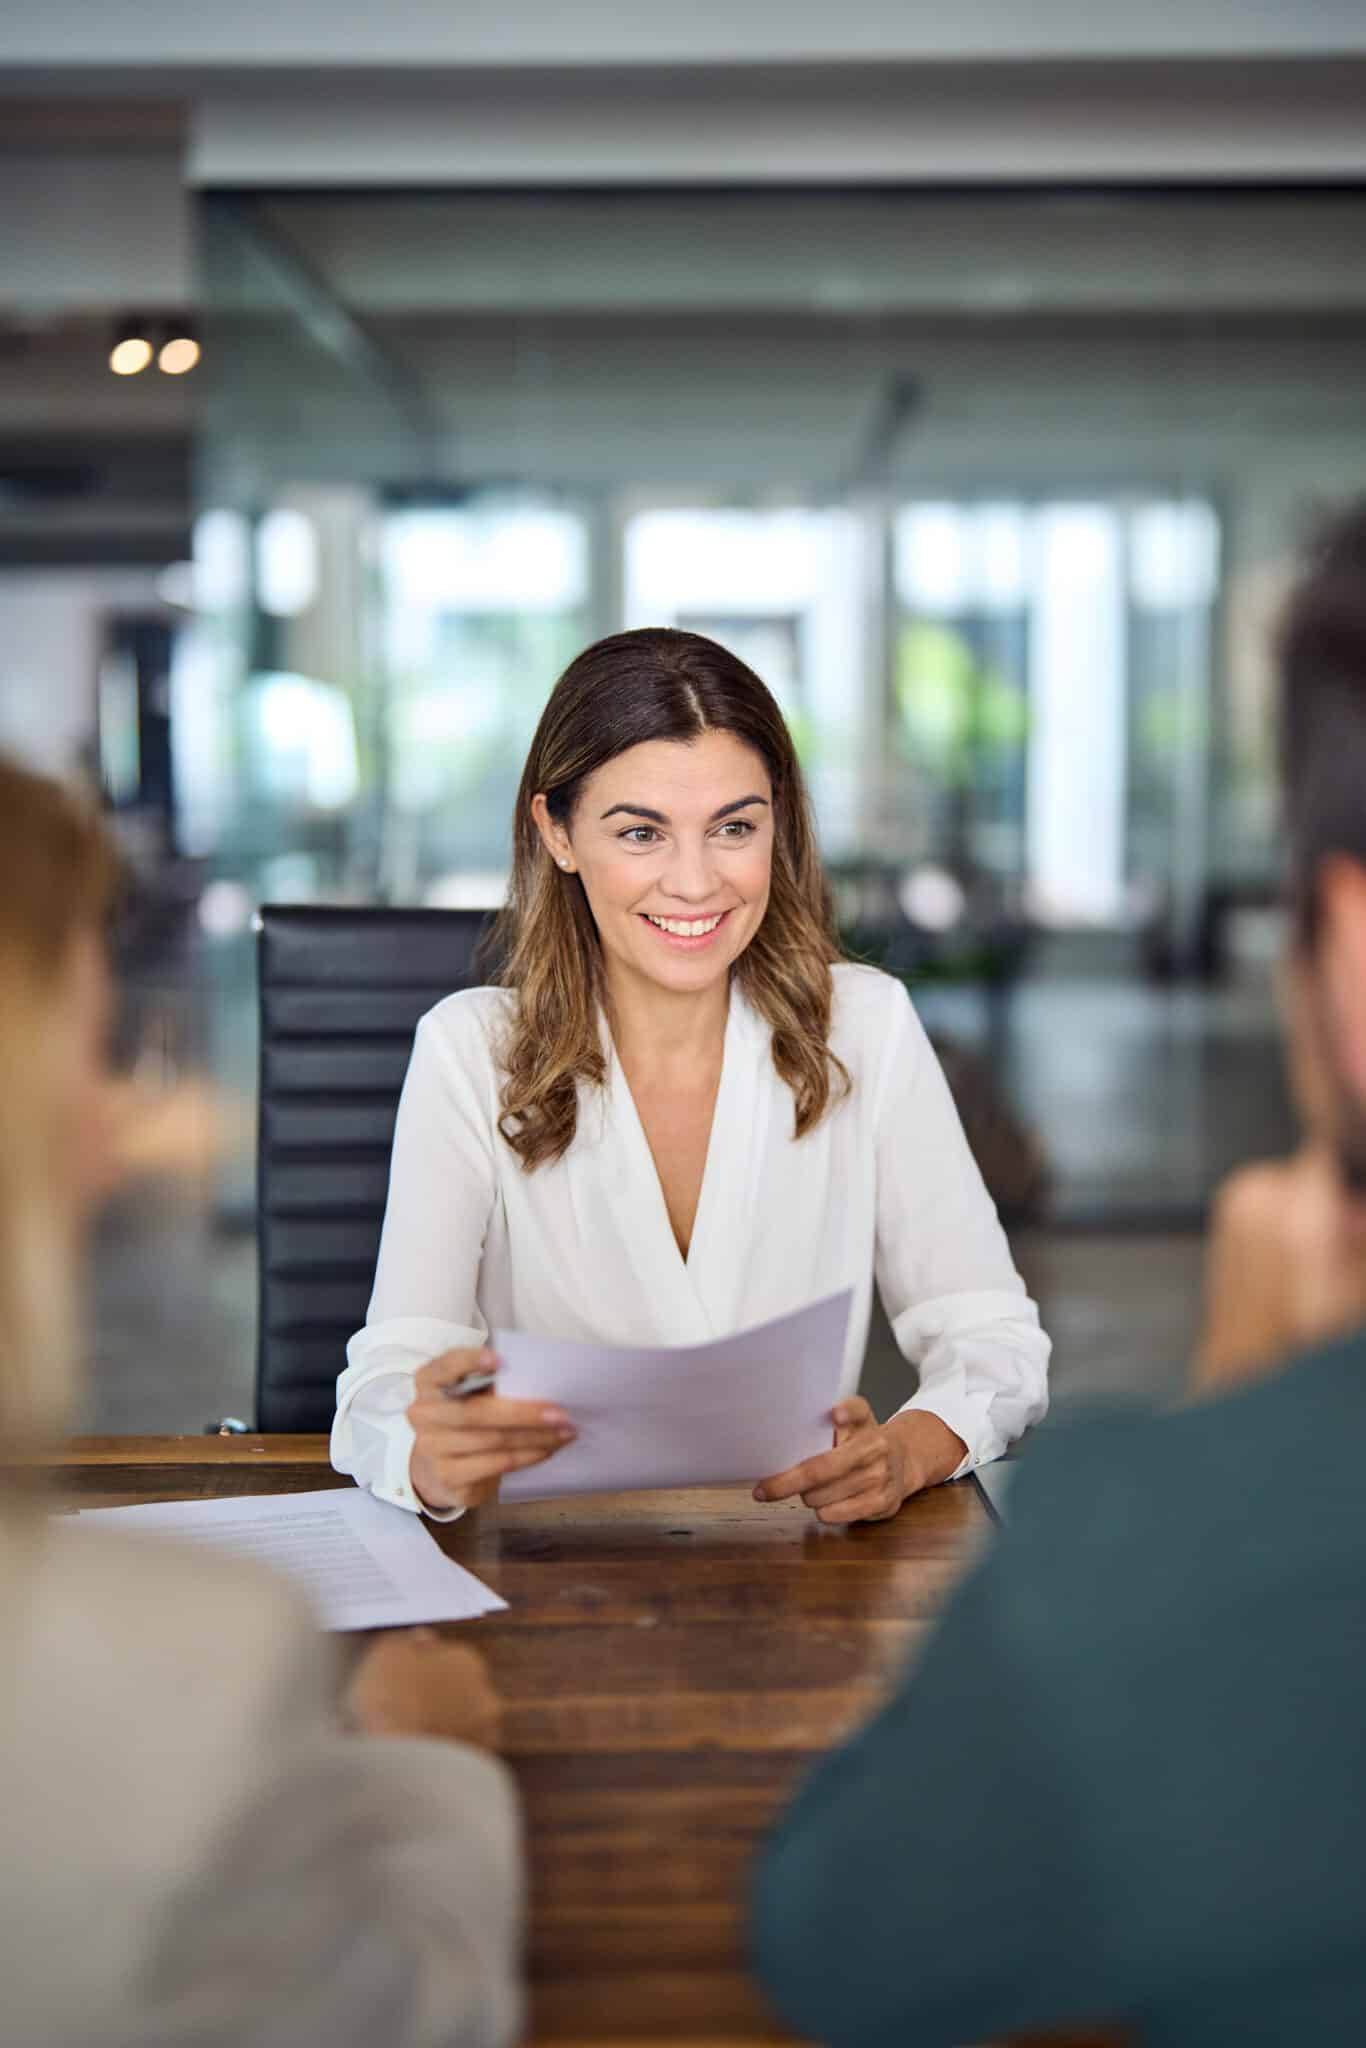 Smiling mature professional business woman banking loan manager, insurance agent, lawyer or financial advisor consulting clients couple sitting at work corporate office meeting. Vertical